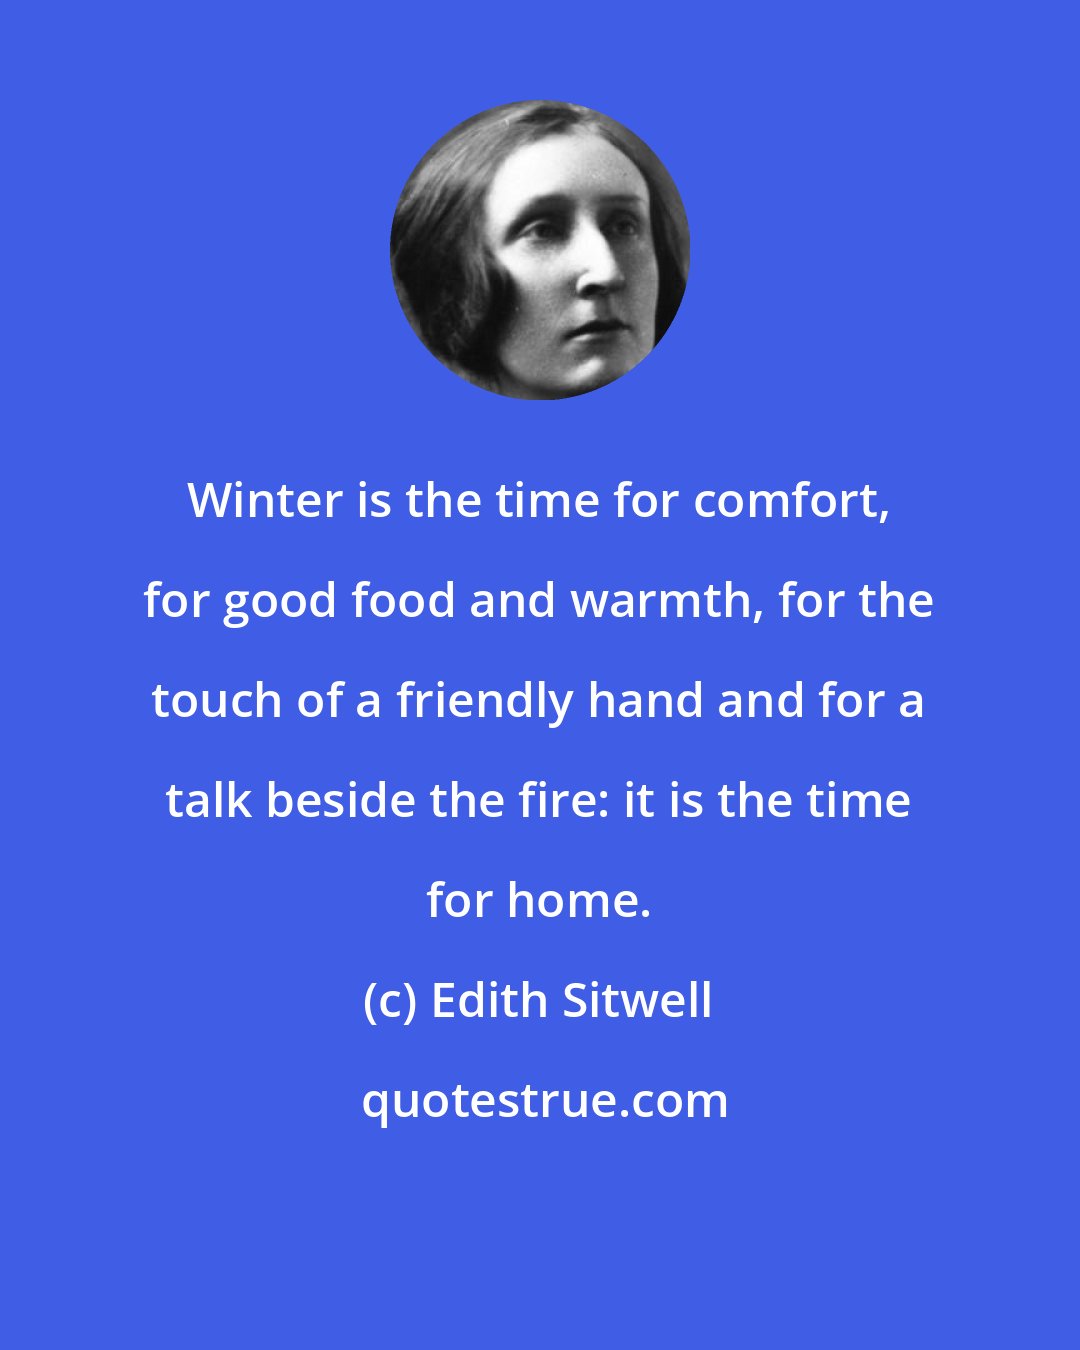 Edith Sitwell: Winter is the time for comfort, for good food and warmth, for the touch of a friendly hand and for a talk beside the fire: it is the time for home.